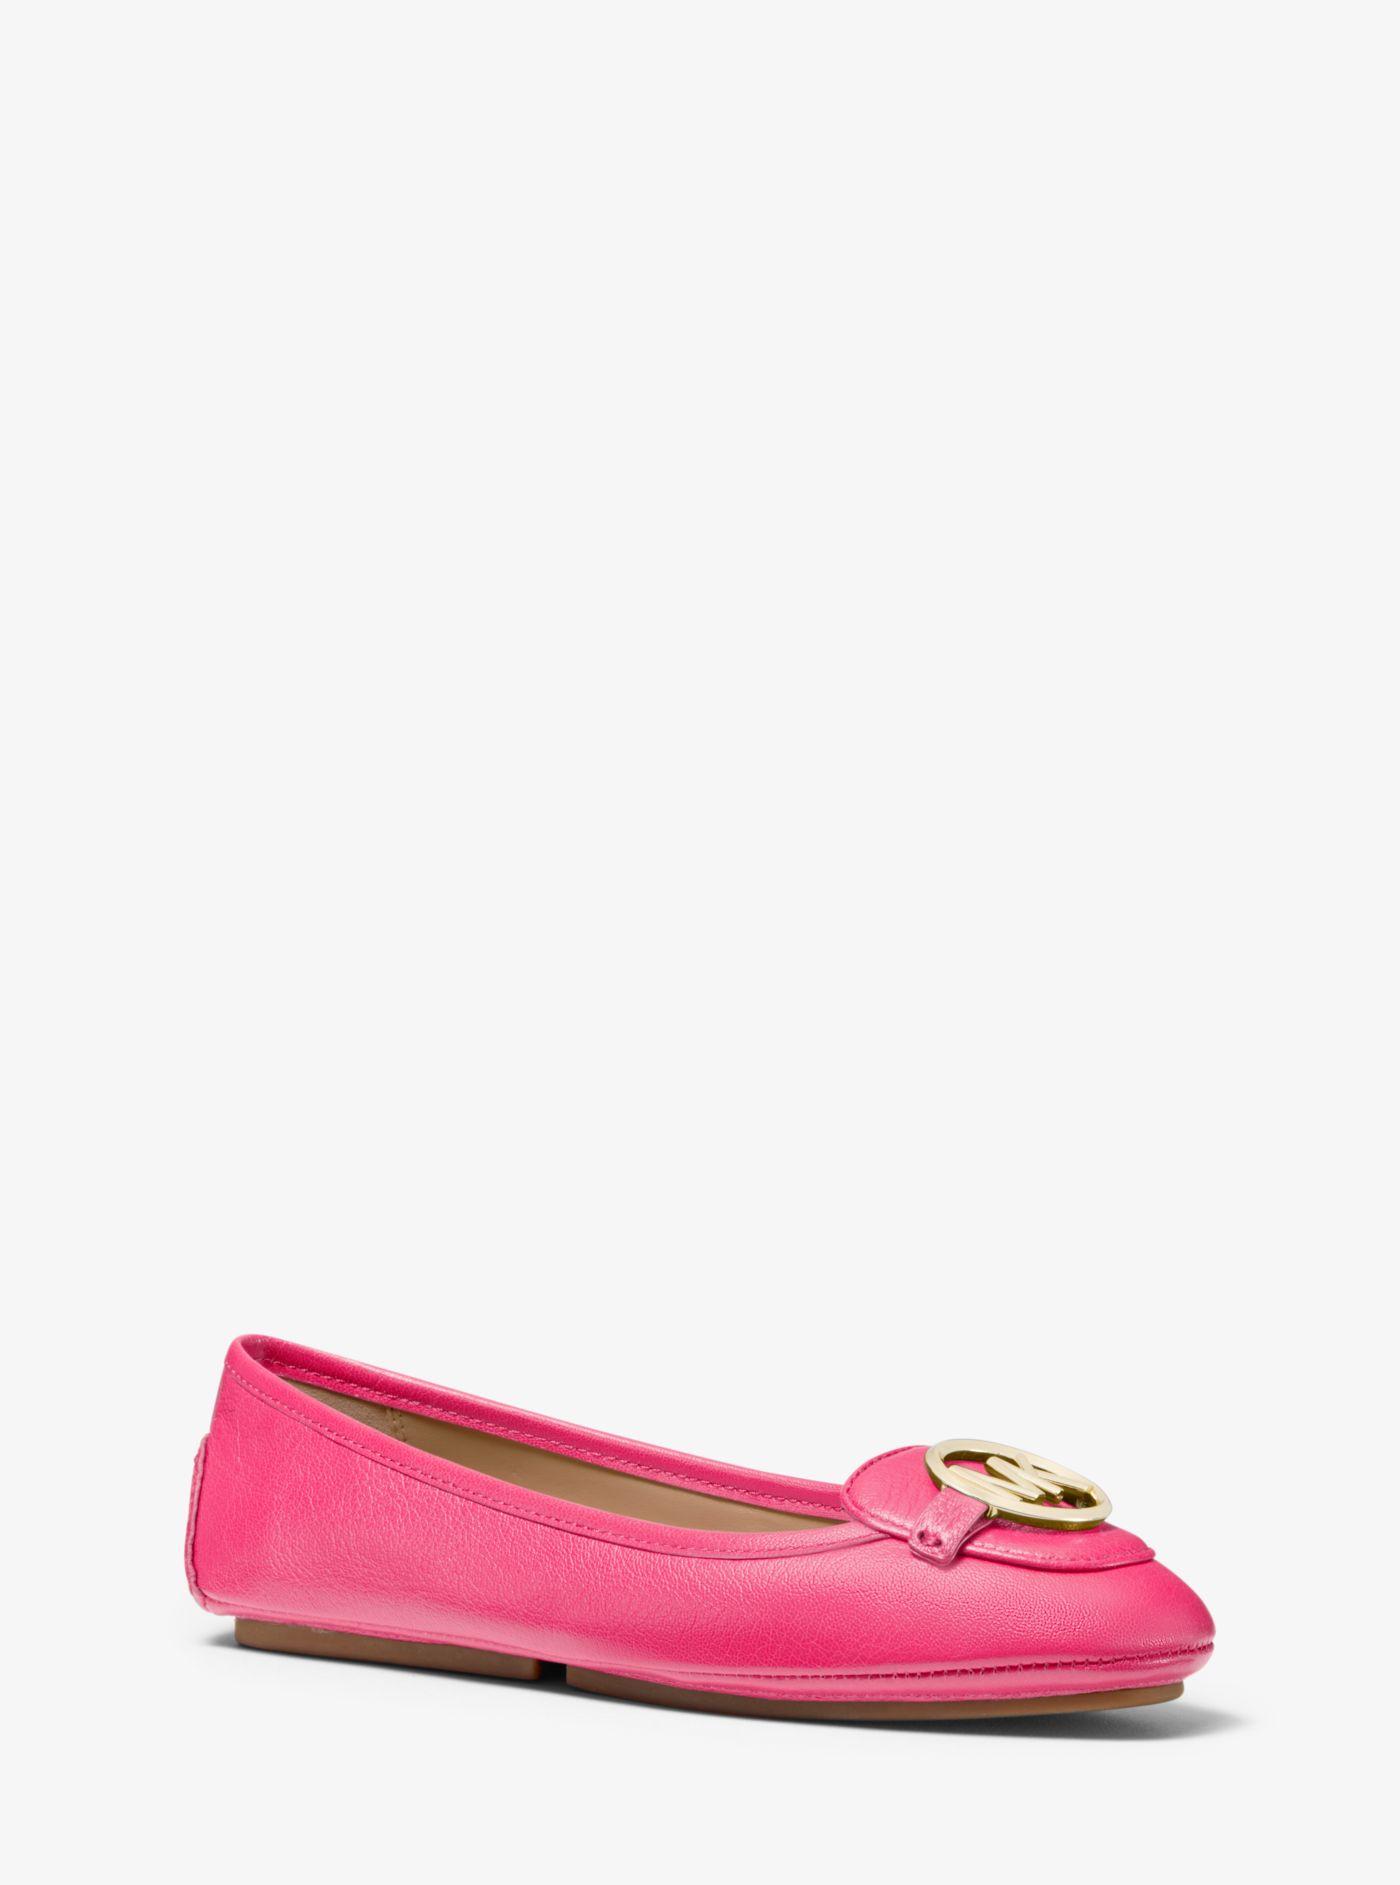 Michael Kors Lillie Leather Moccasin in Pink | Lyst